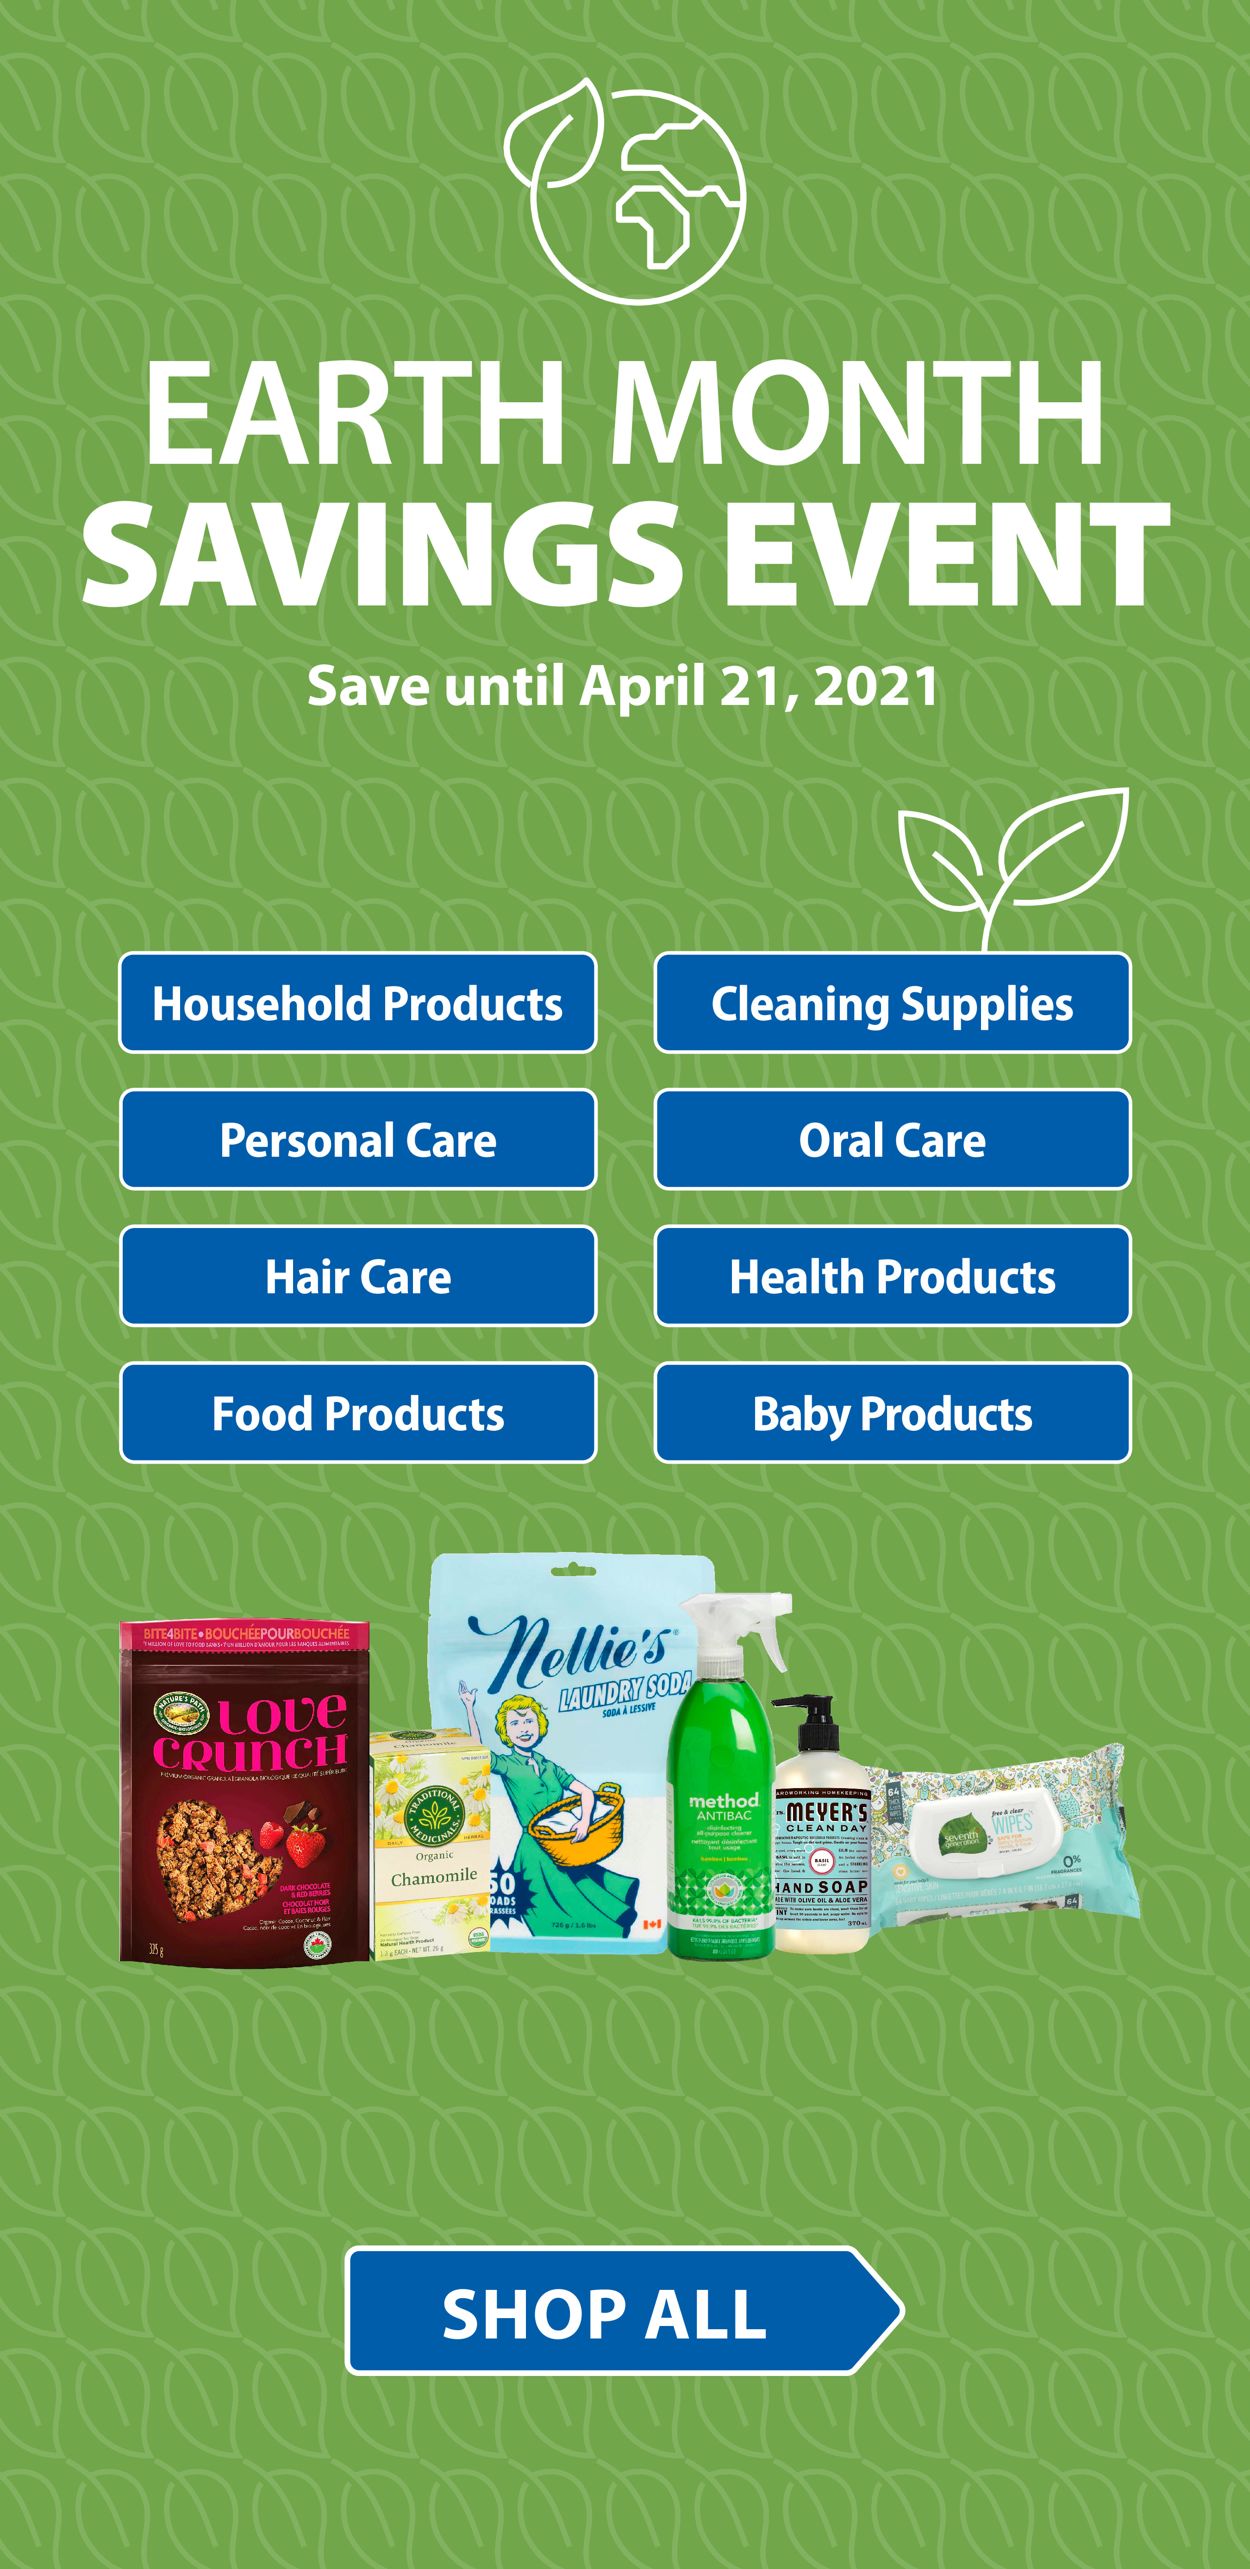 London Drugs Flyer from 04/09/2021